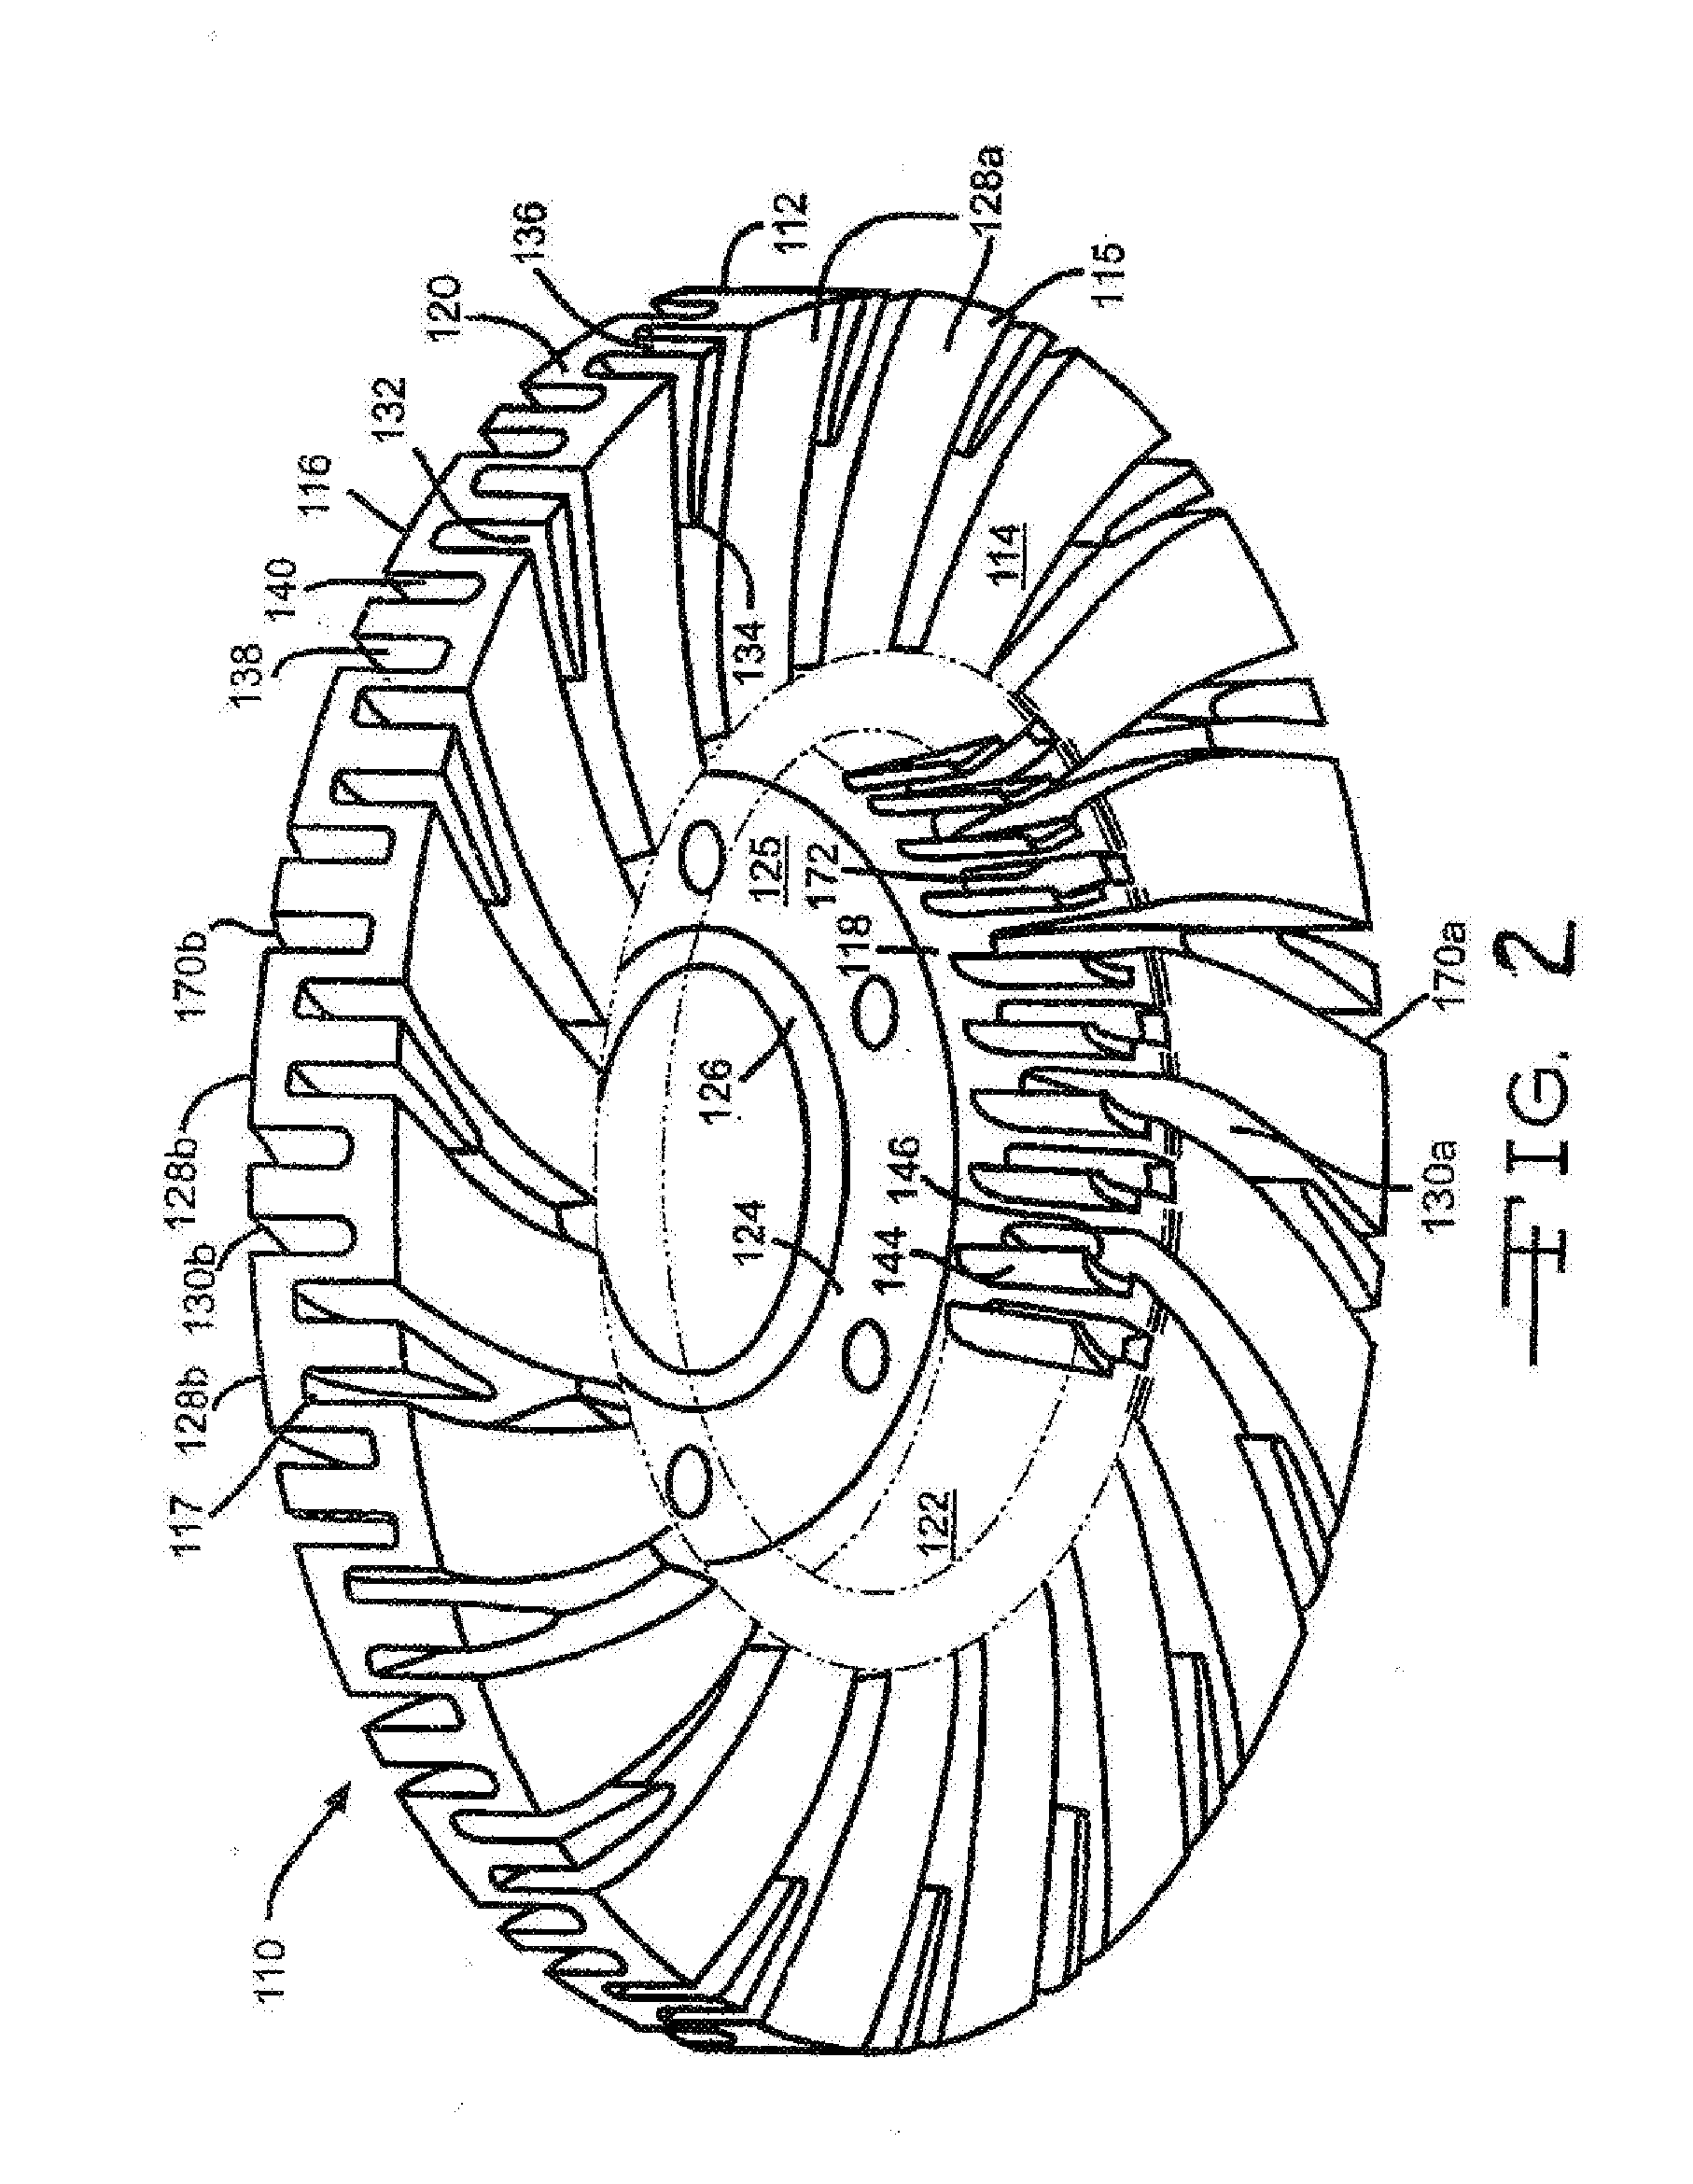 Segmented brake rotor with externally vented carrier